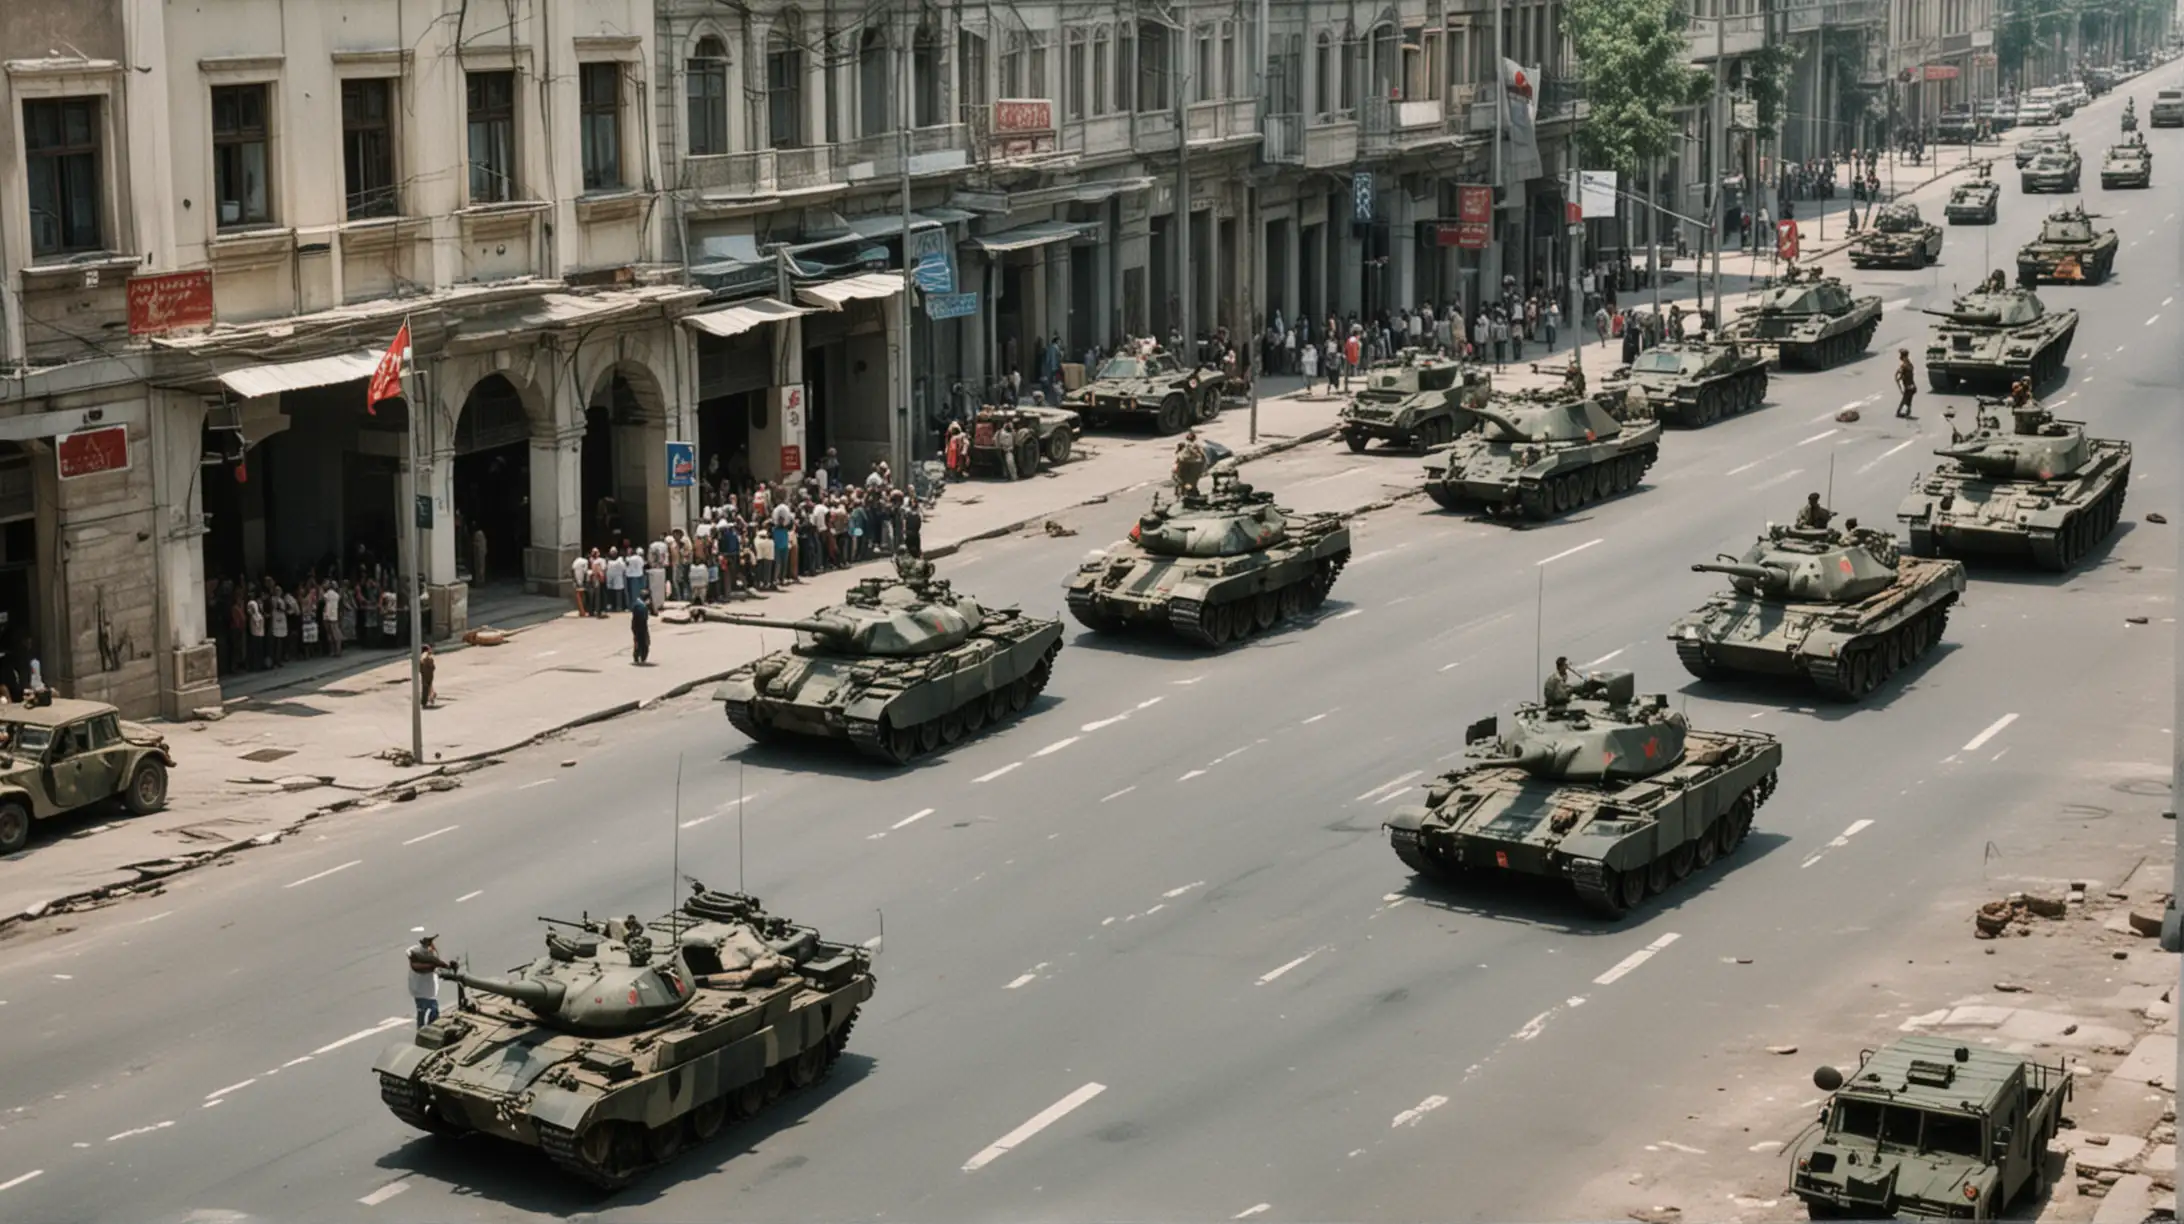 Military Presence: An image of tanks and military vehicles stationed on the streets during the attempted coup in 1991. Provide a caption explaining the circumstances of the coup and its implications for the Soviet government.

